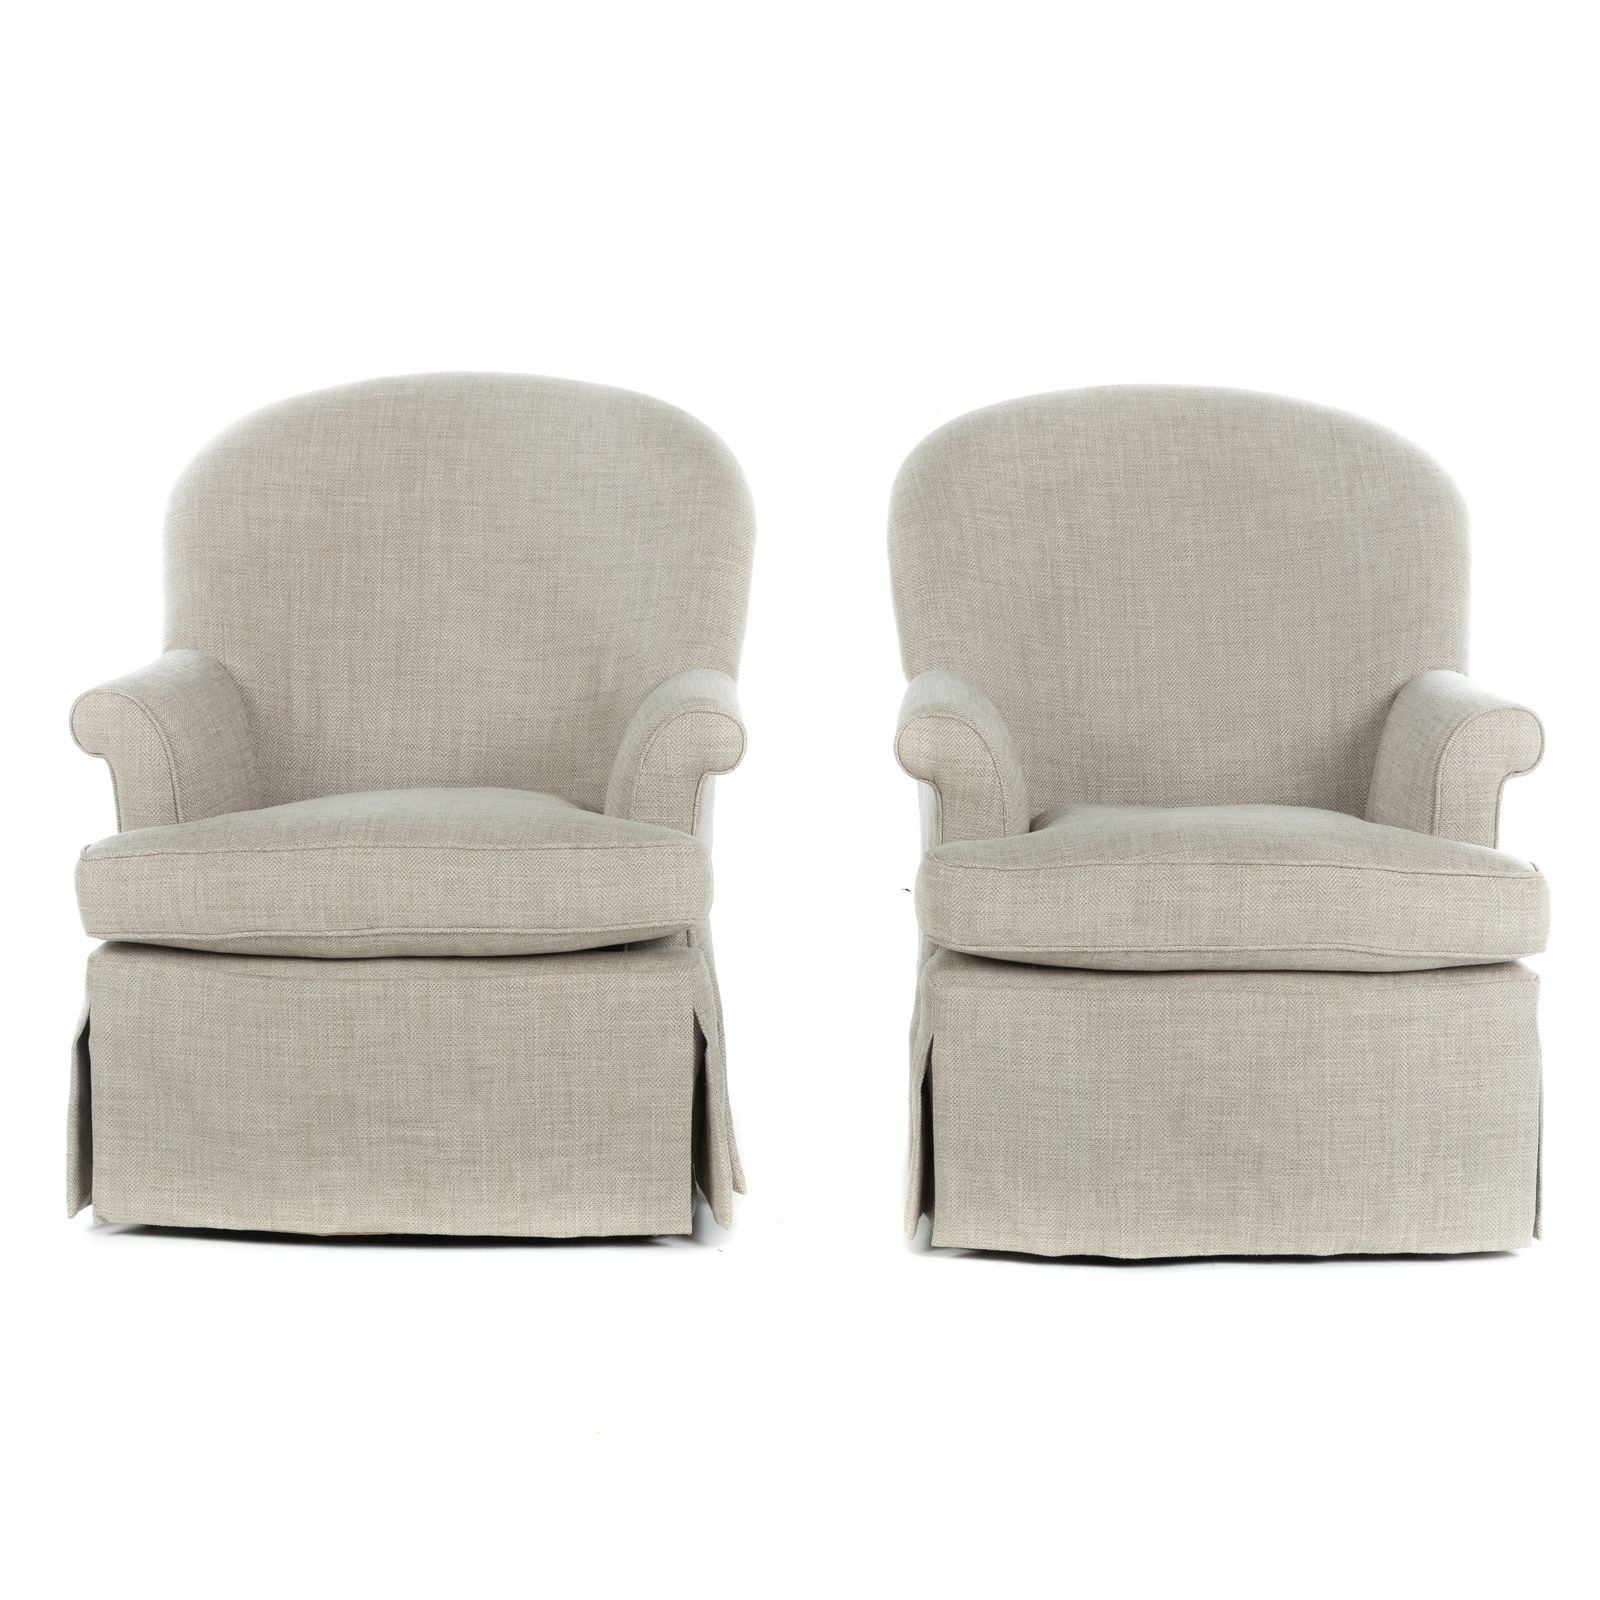 A PAIR OF CONTEMPORARY UPHOLSTERED 36a742